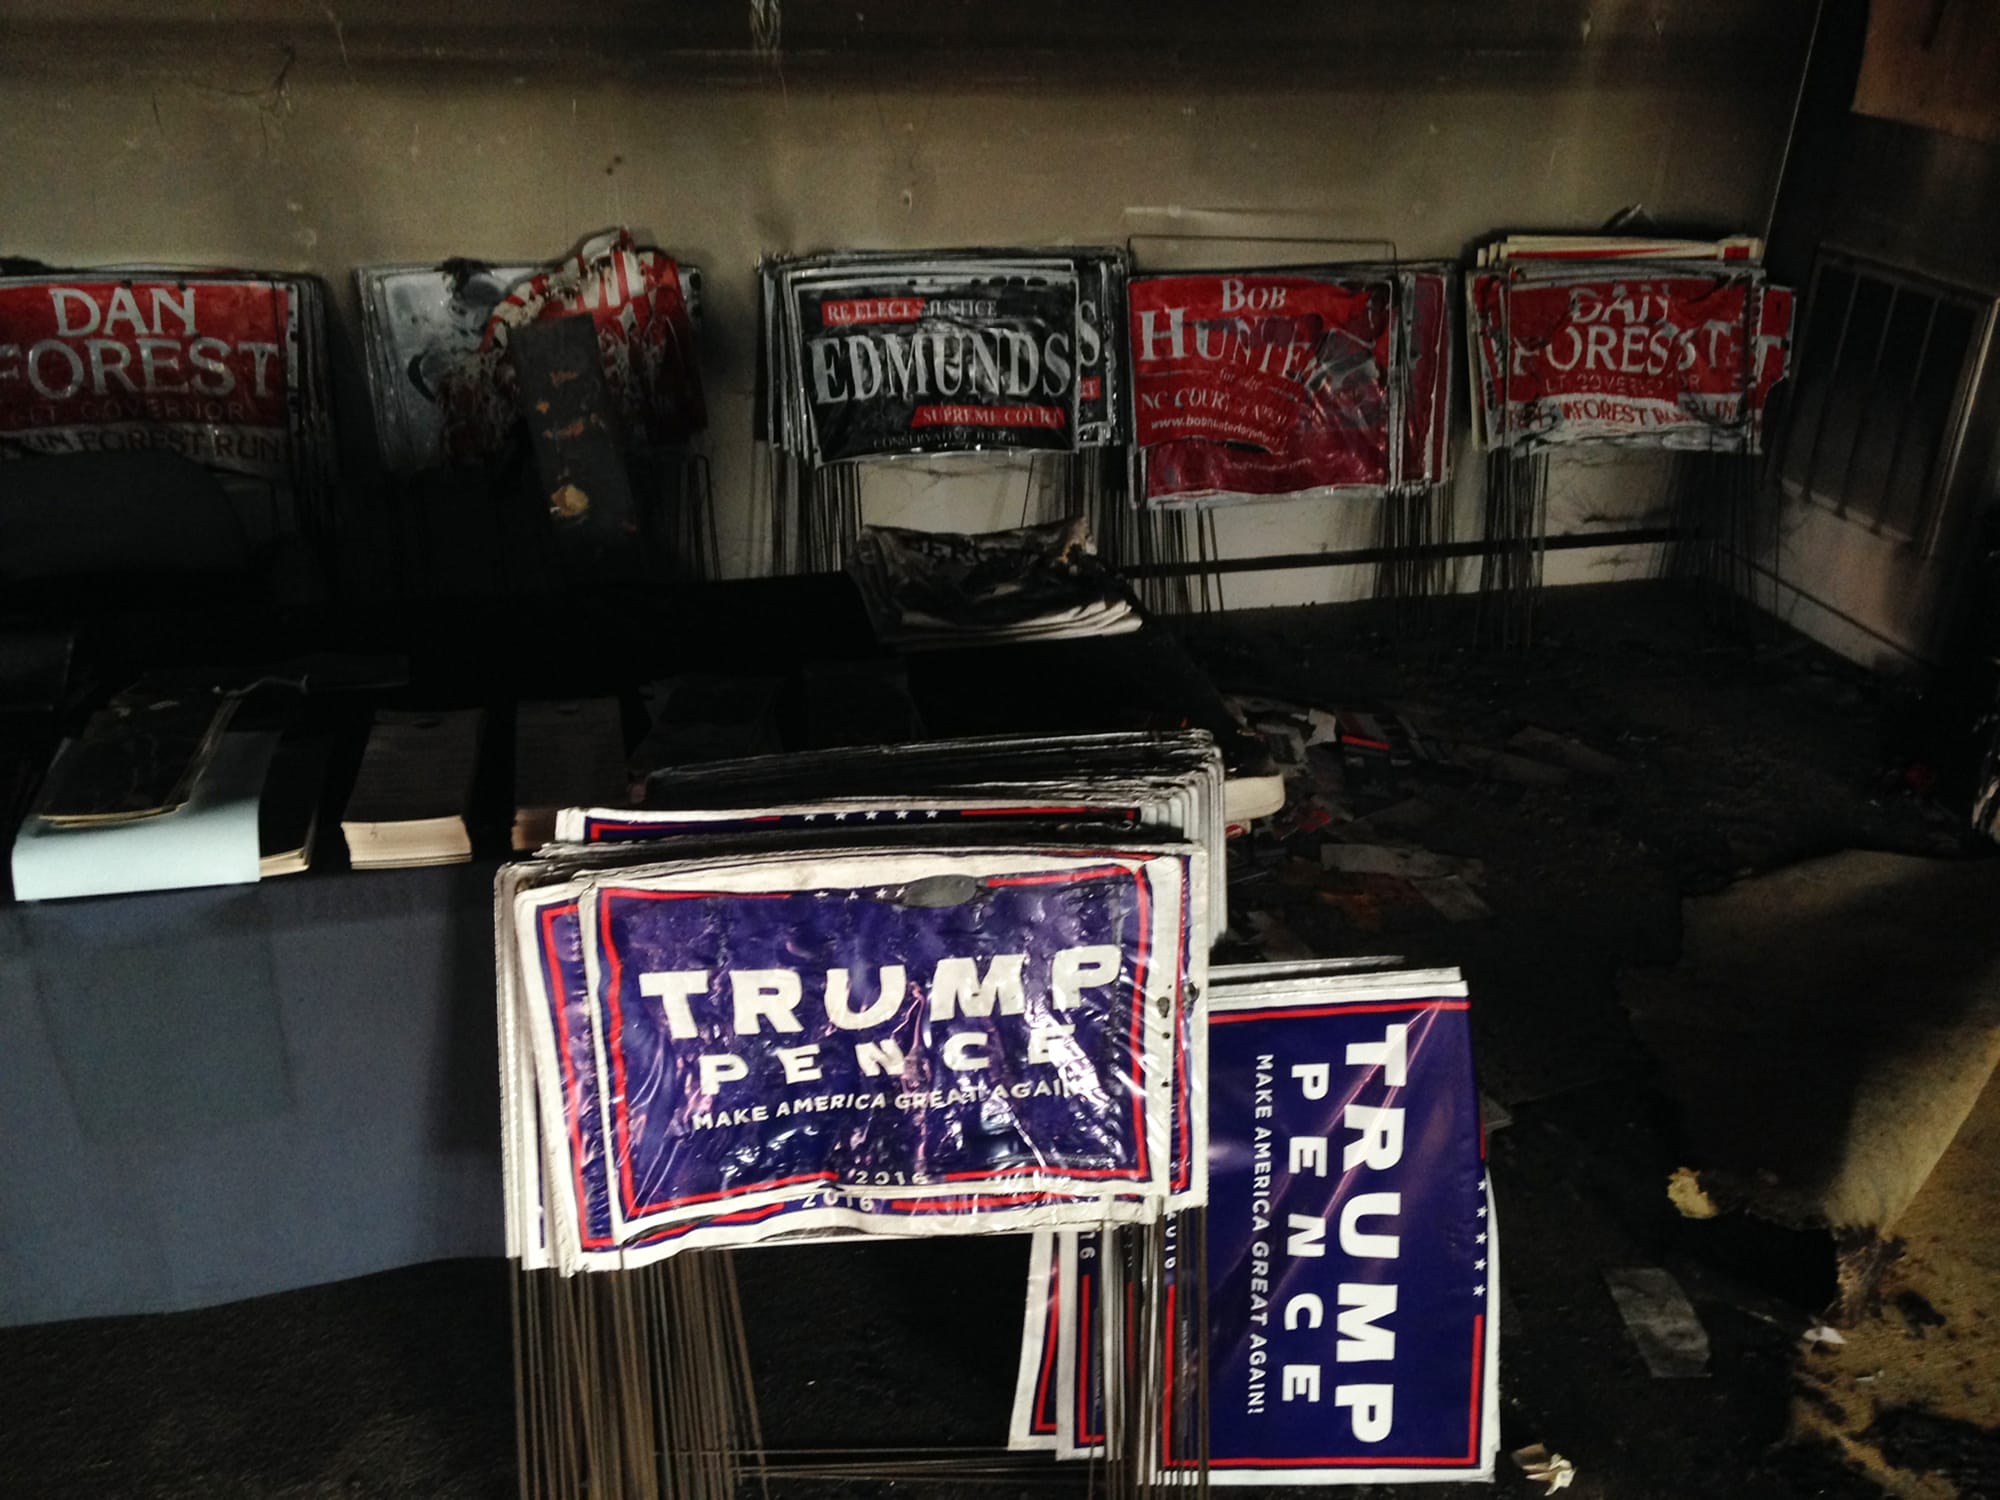 Melted campaign signs are seen at the Orange County Republican Headquarters in Hillsborough, NC on Sunday, Oct. 16, 2016.  Someone threw flammable liquid inside a bottle through a window overnight and someone spray-painted an anti-GOP slogan referring to "Nazi Republicans" on a nearby wall, authorities said Sunday. State GOP director Dallas Woodhouse said no one was injured.